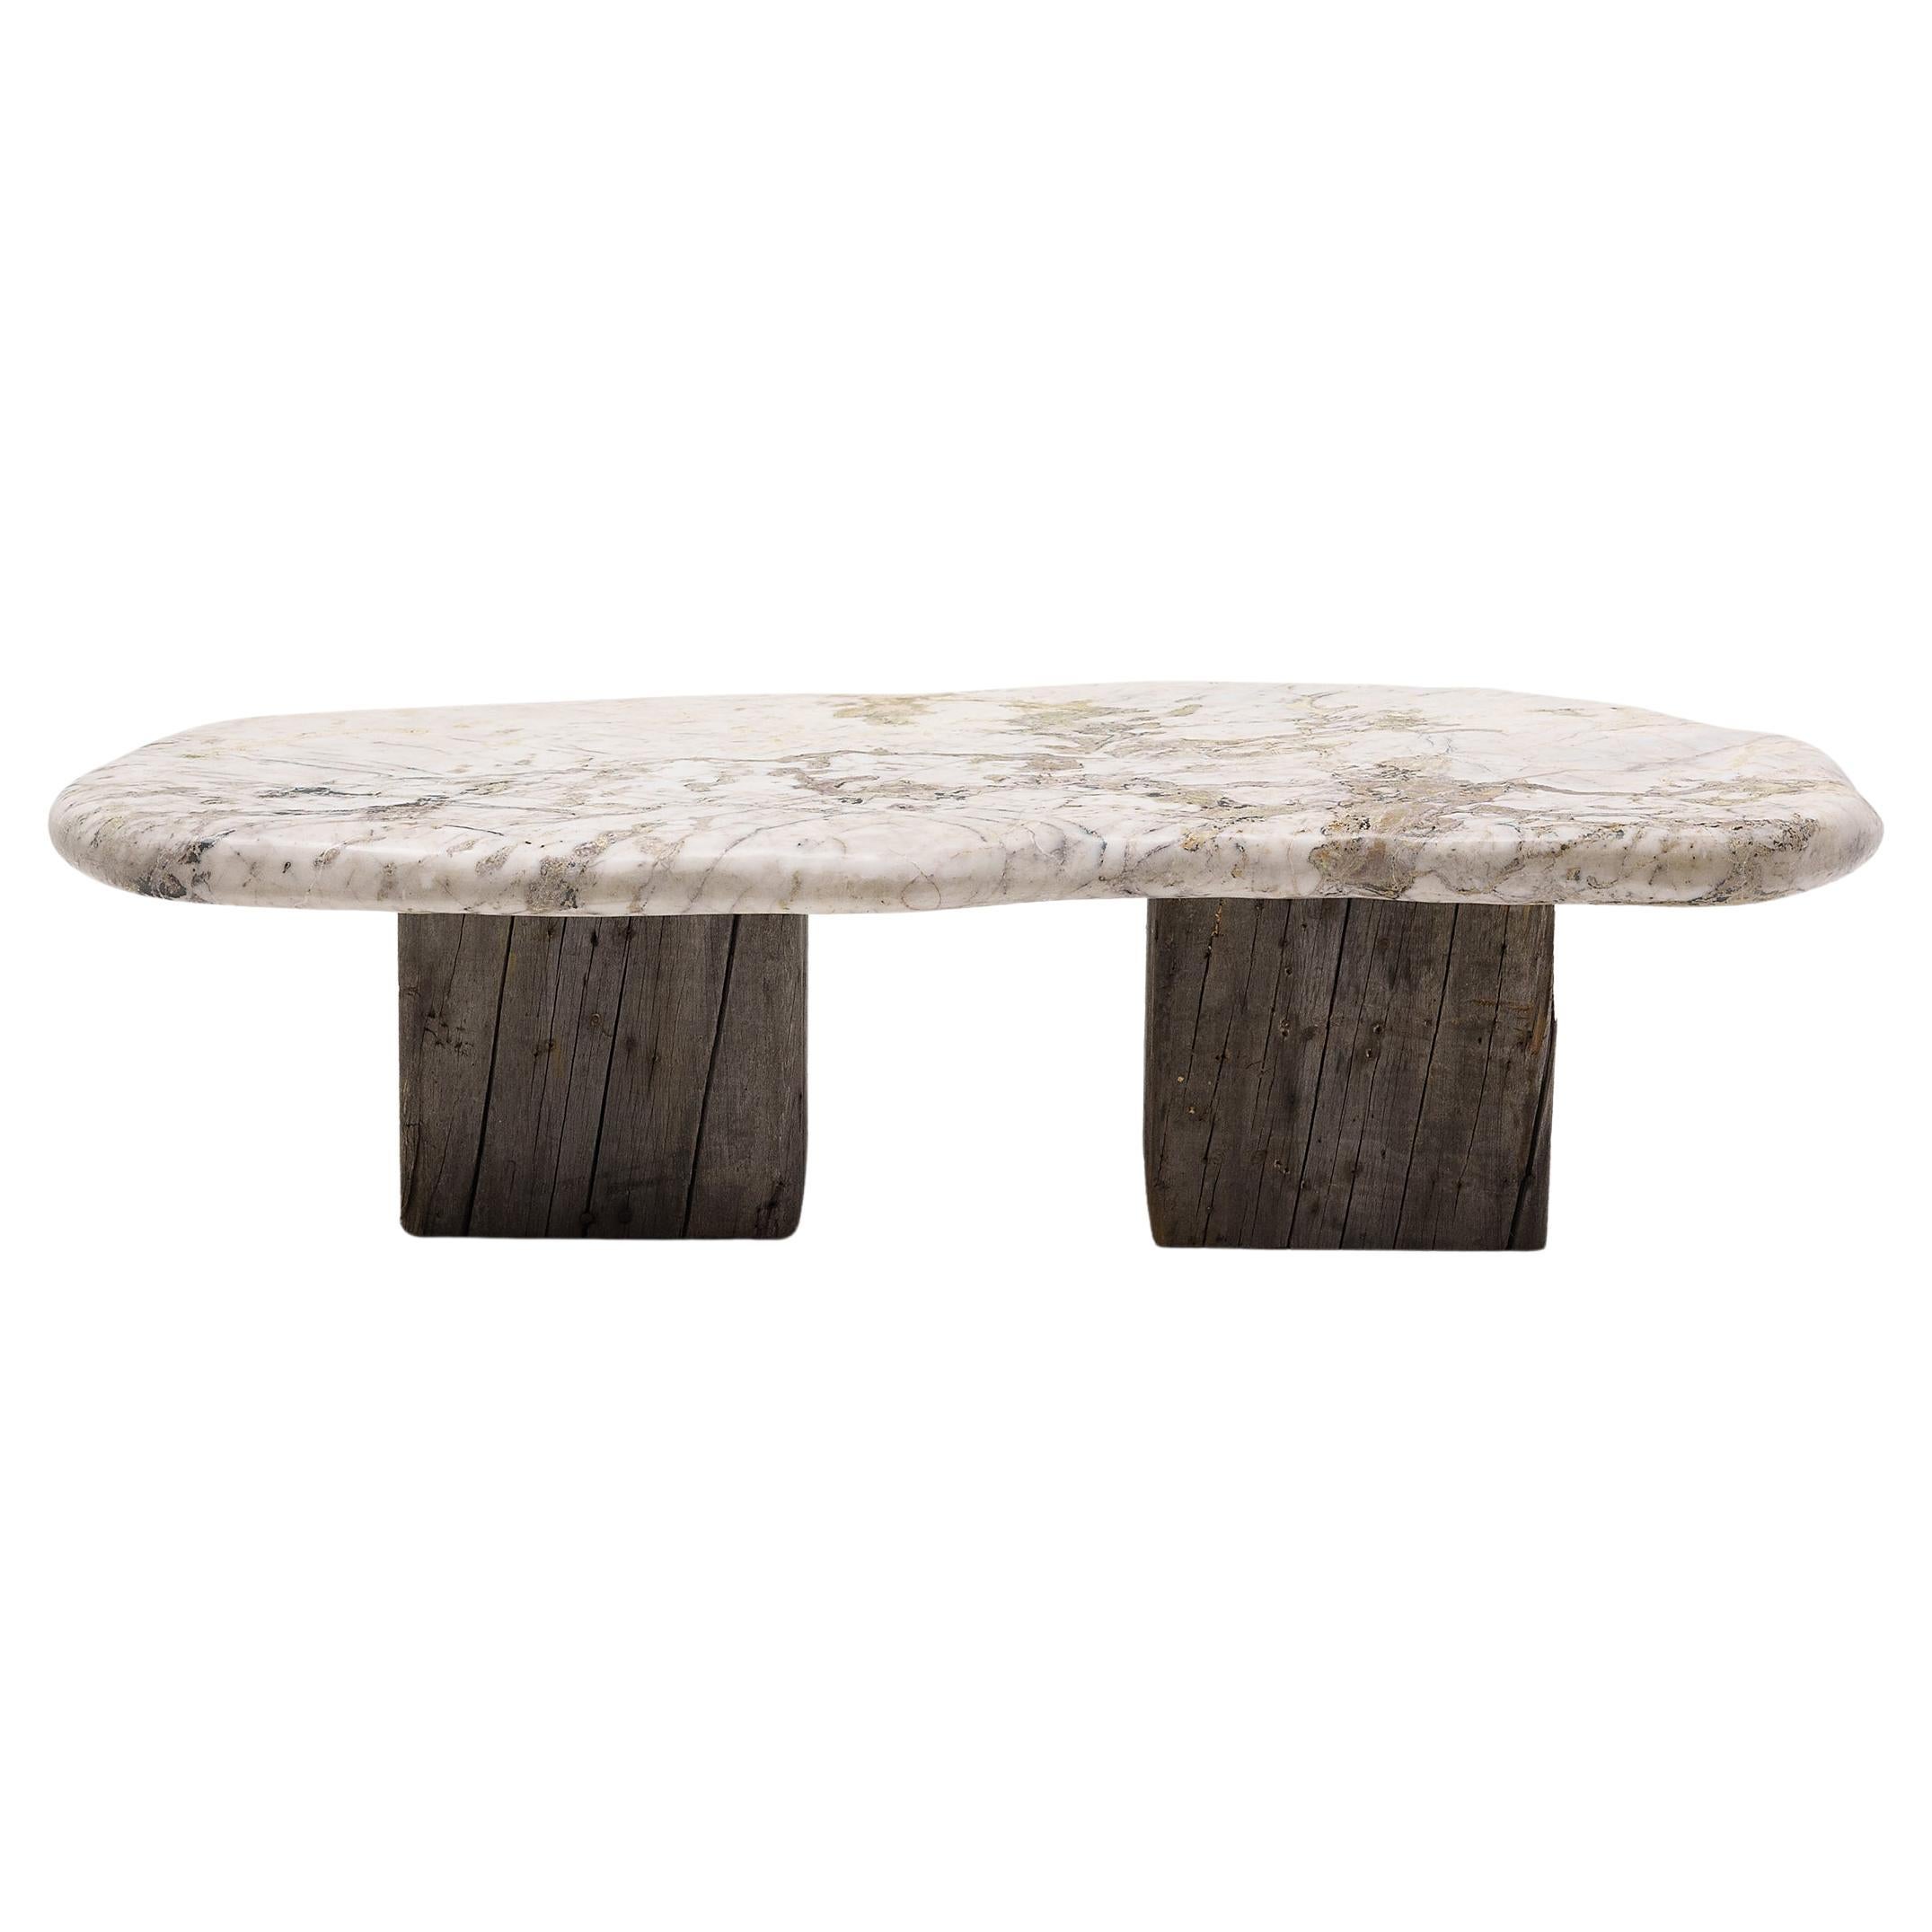 Chinese Glacial Meditation Stone Table For Sale